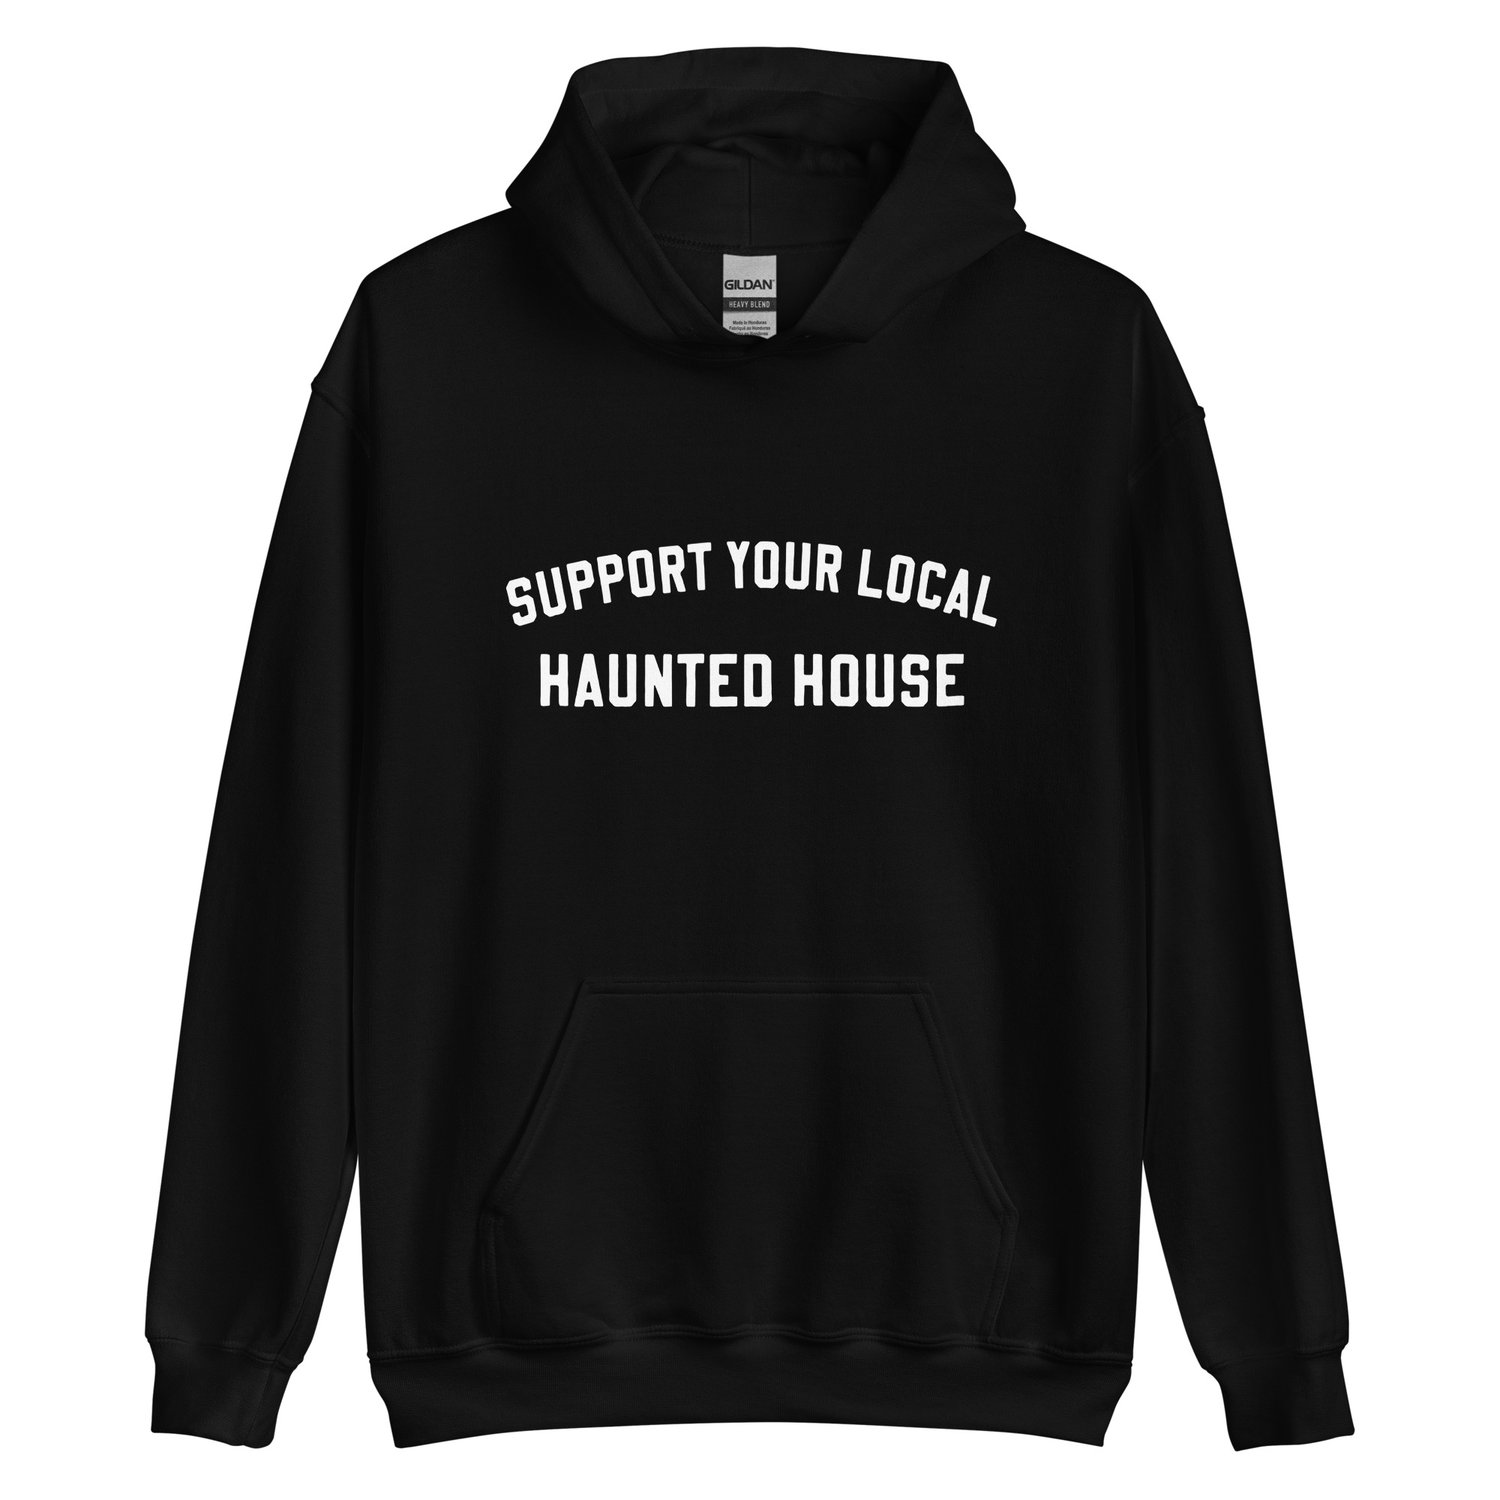 Image of Support Your Local Haunted House hoodie